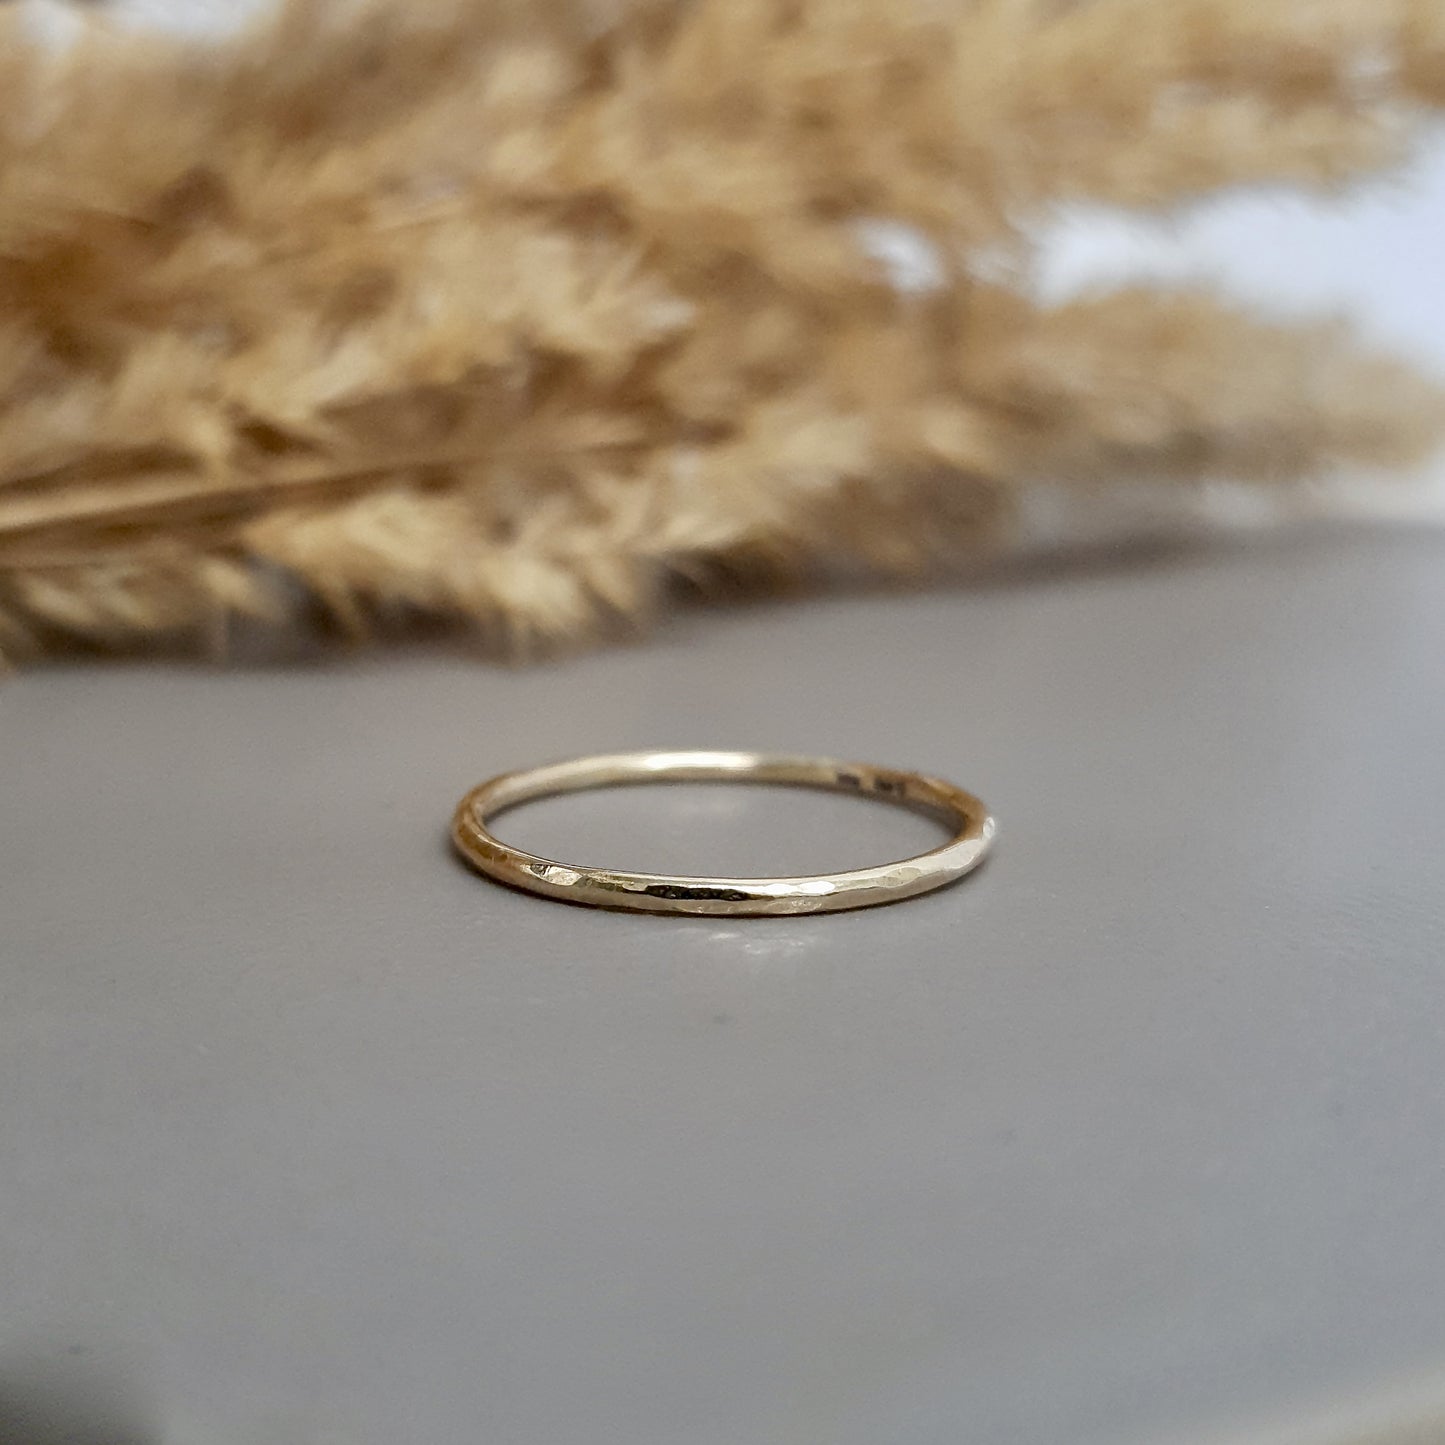 Hammered Gold Stacking Ring - 9ct Gold